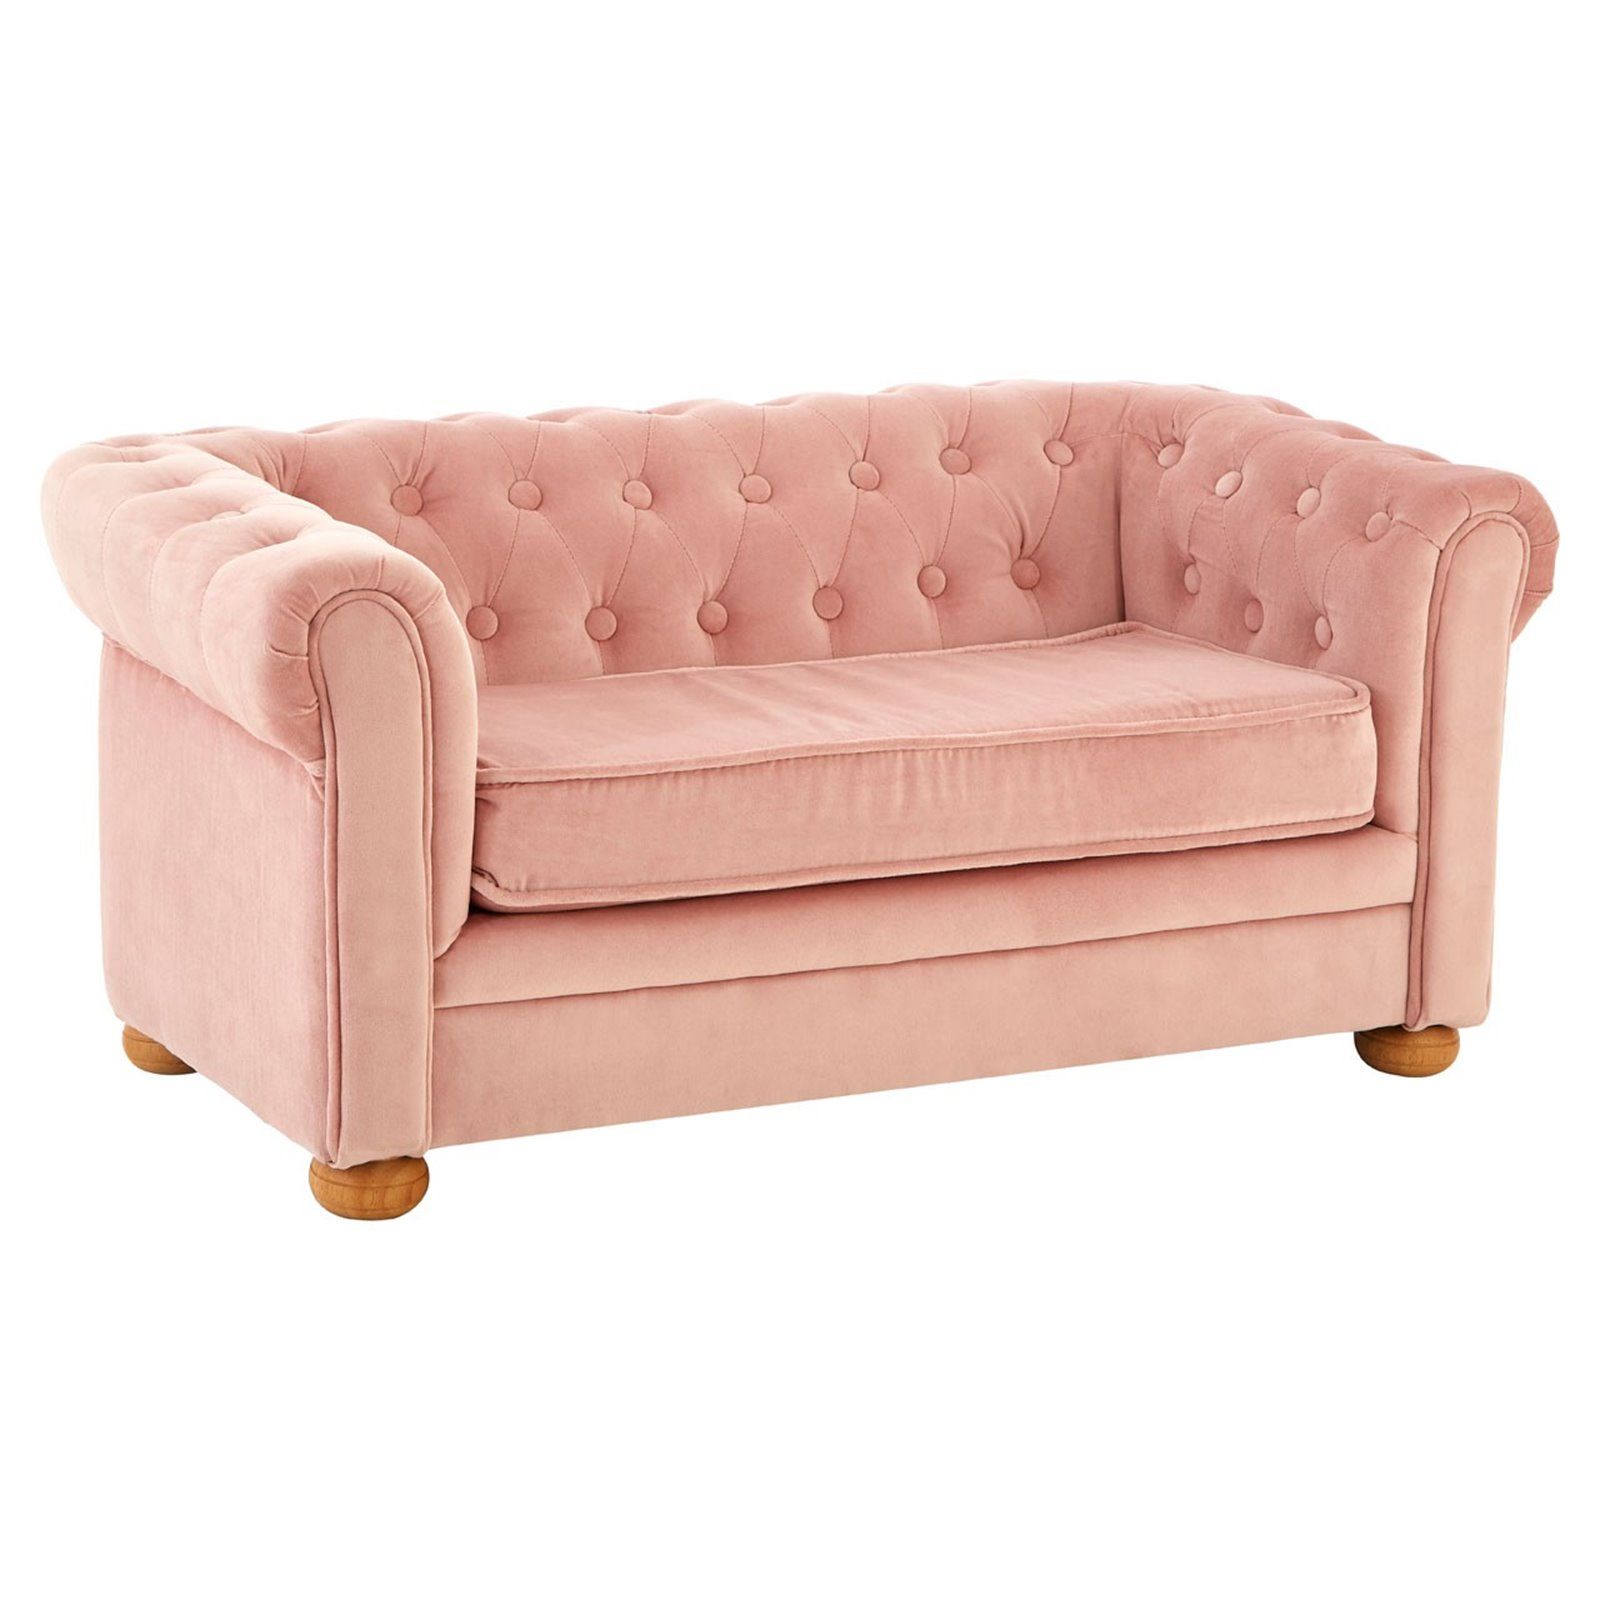 Pink Child's Chesterfield Sofa With Children's Sofa Beds (Gallery 17 of 20)